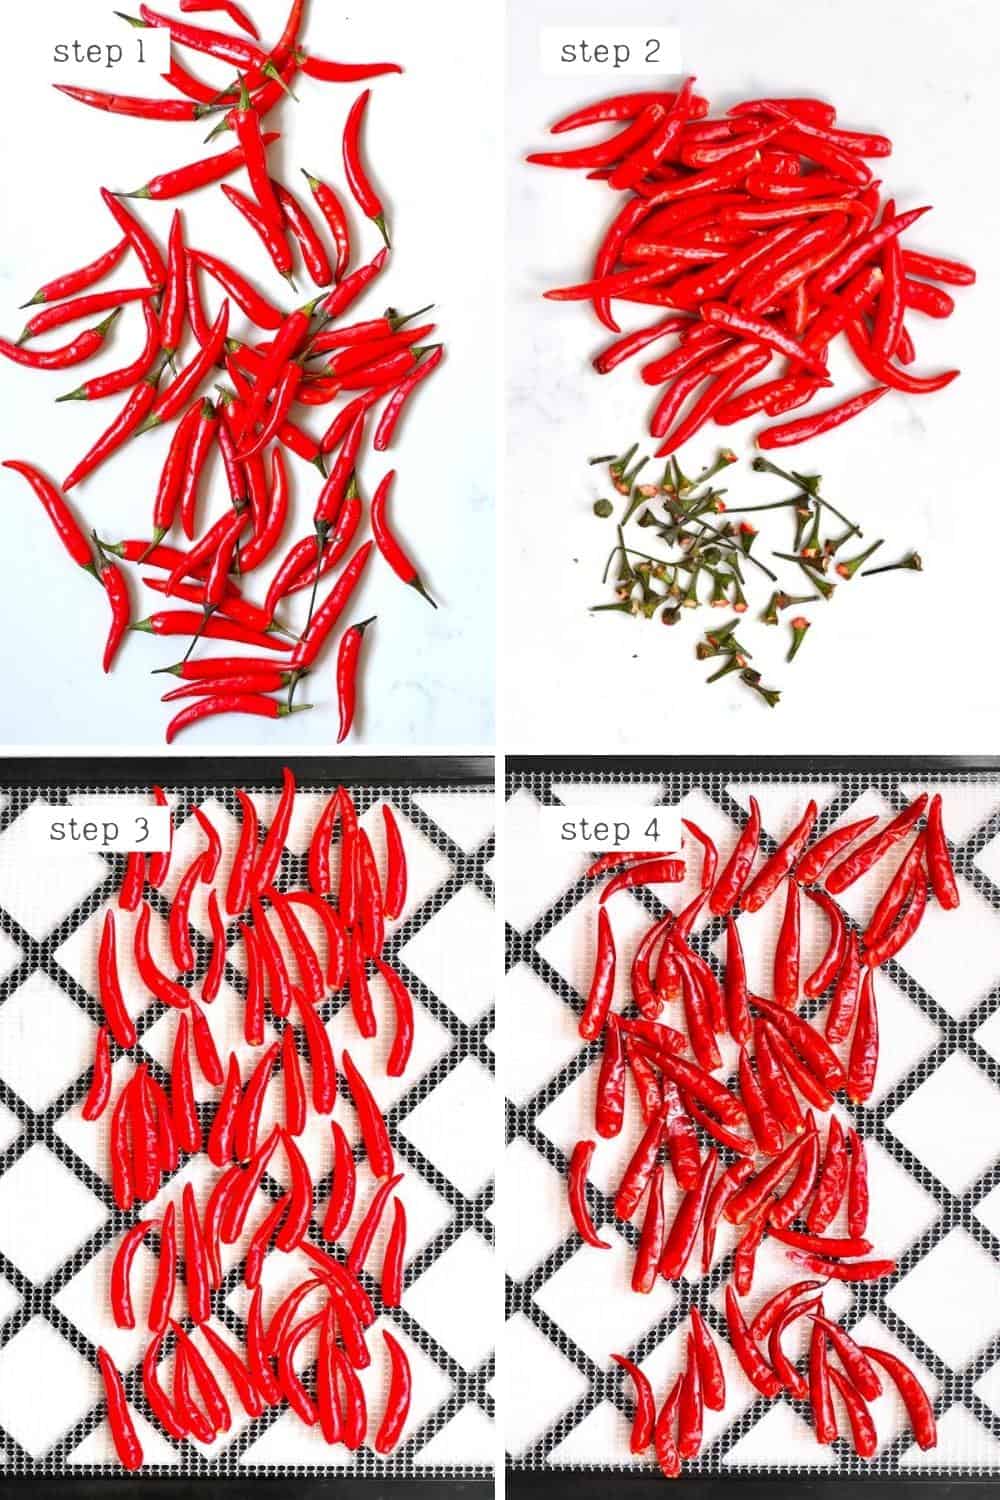 Steps for drying chilies